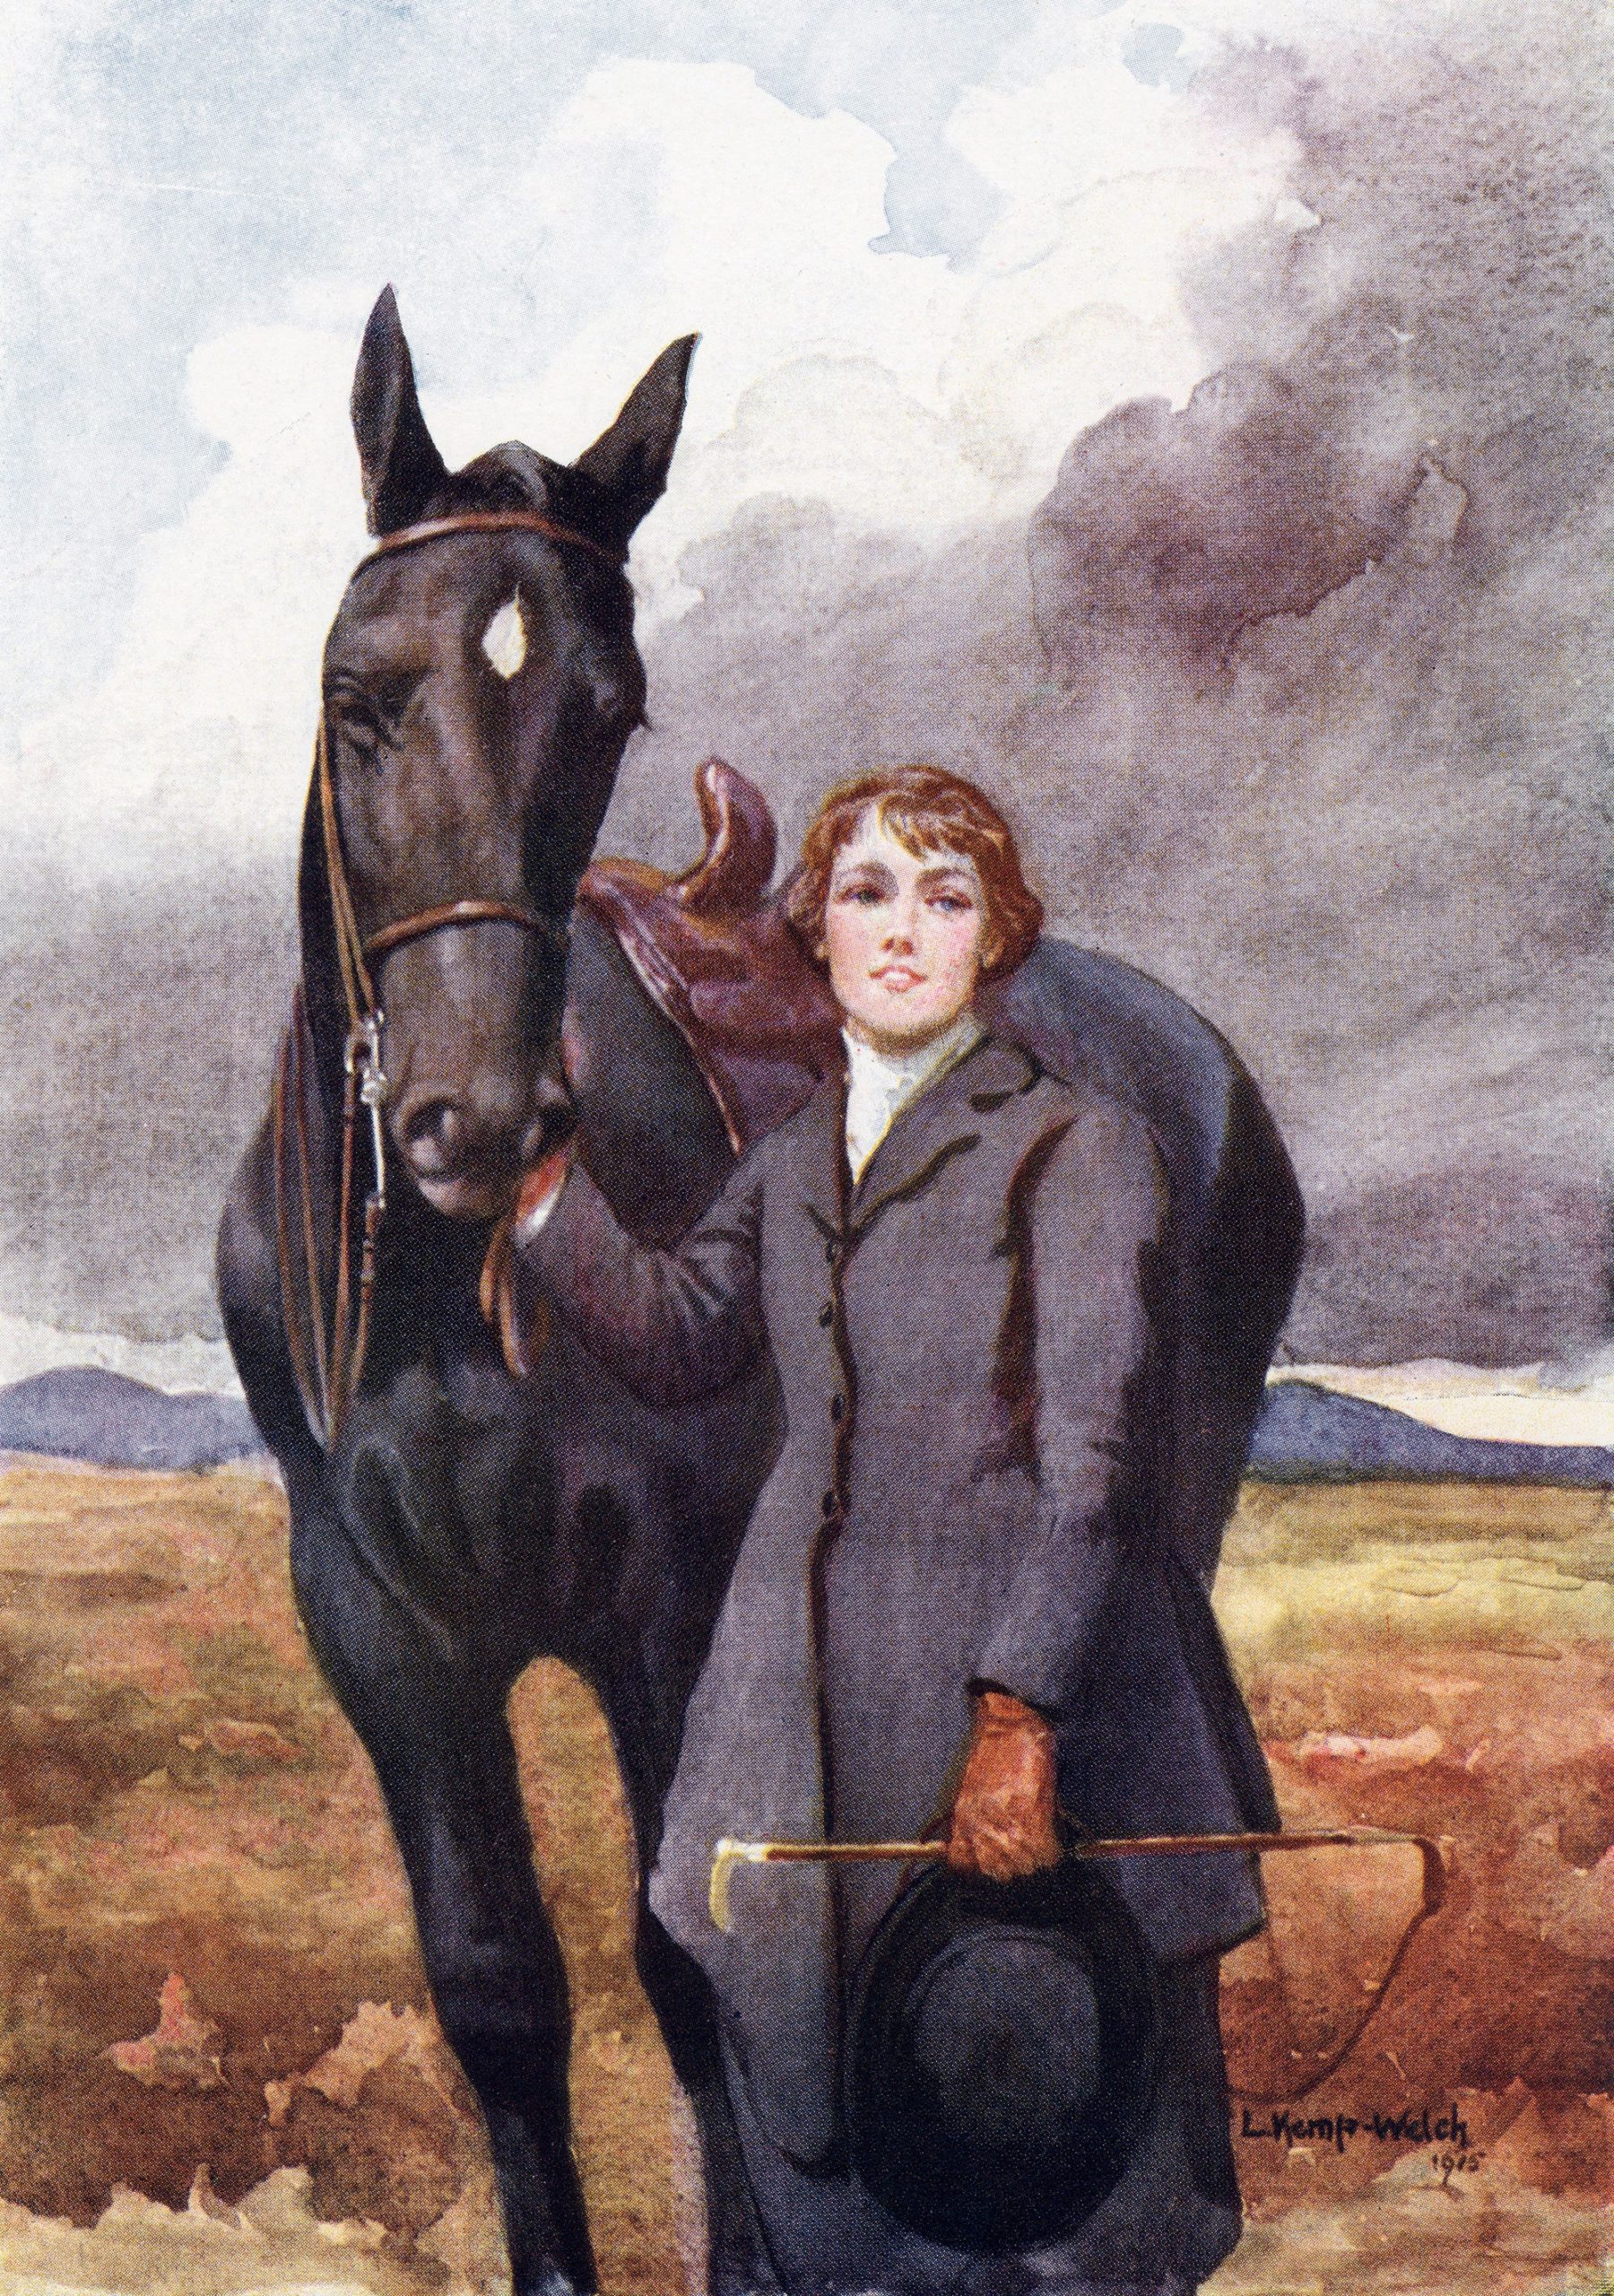 Black Beauty and a young woman in an illustration for the 1915 edition of Black Beauty (image by Lucy Kemp Welch, accessed through the Universal History Archive via Getty).